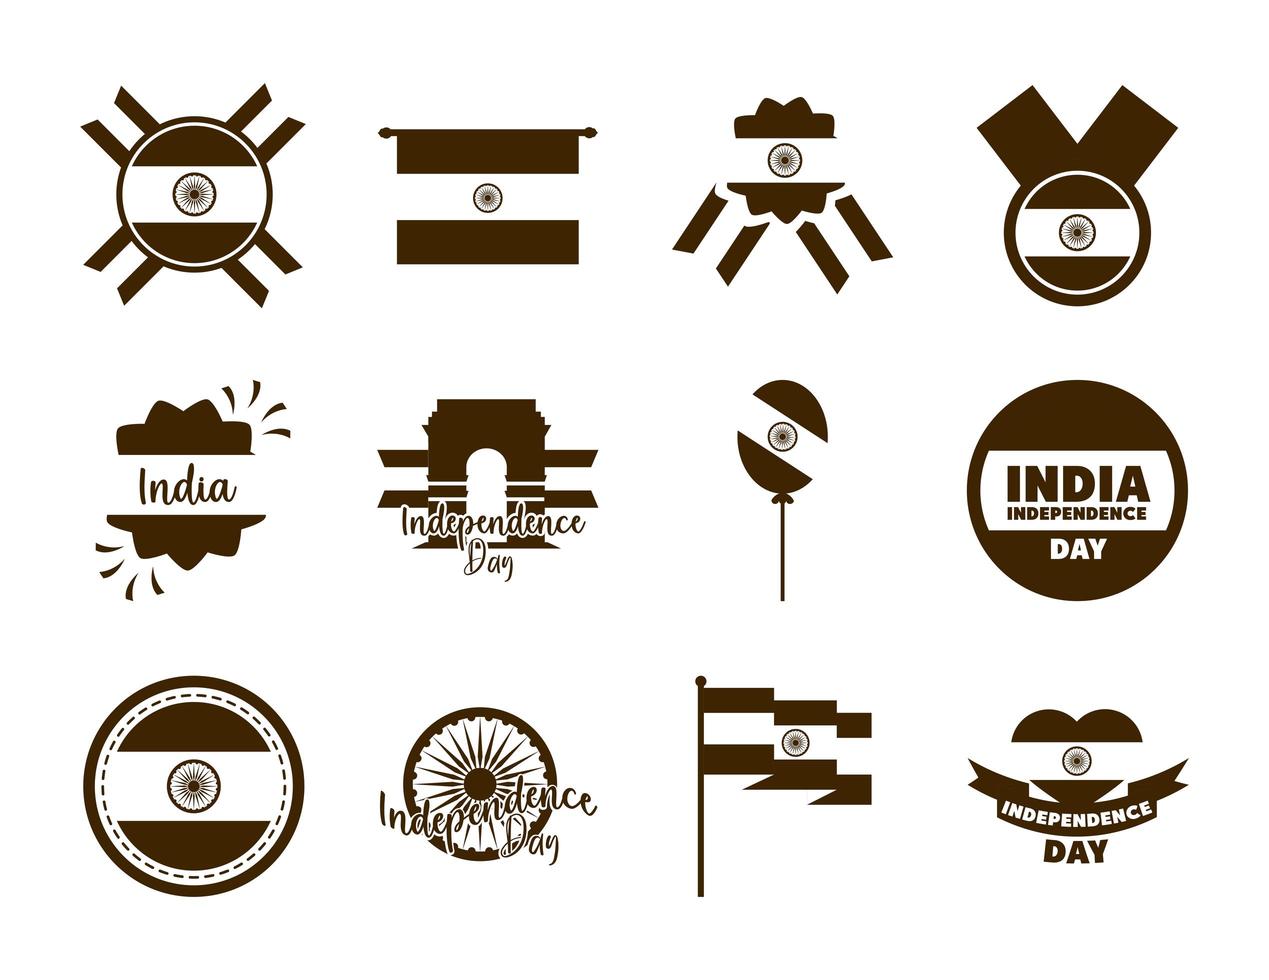 India Independence Day icon set vector